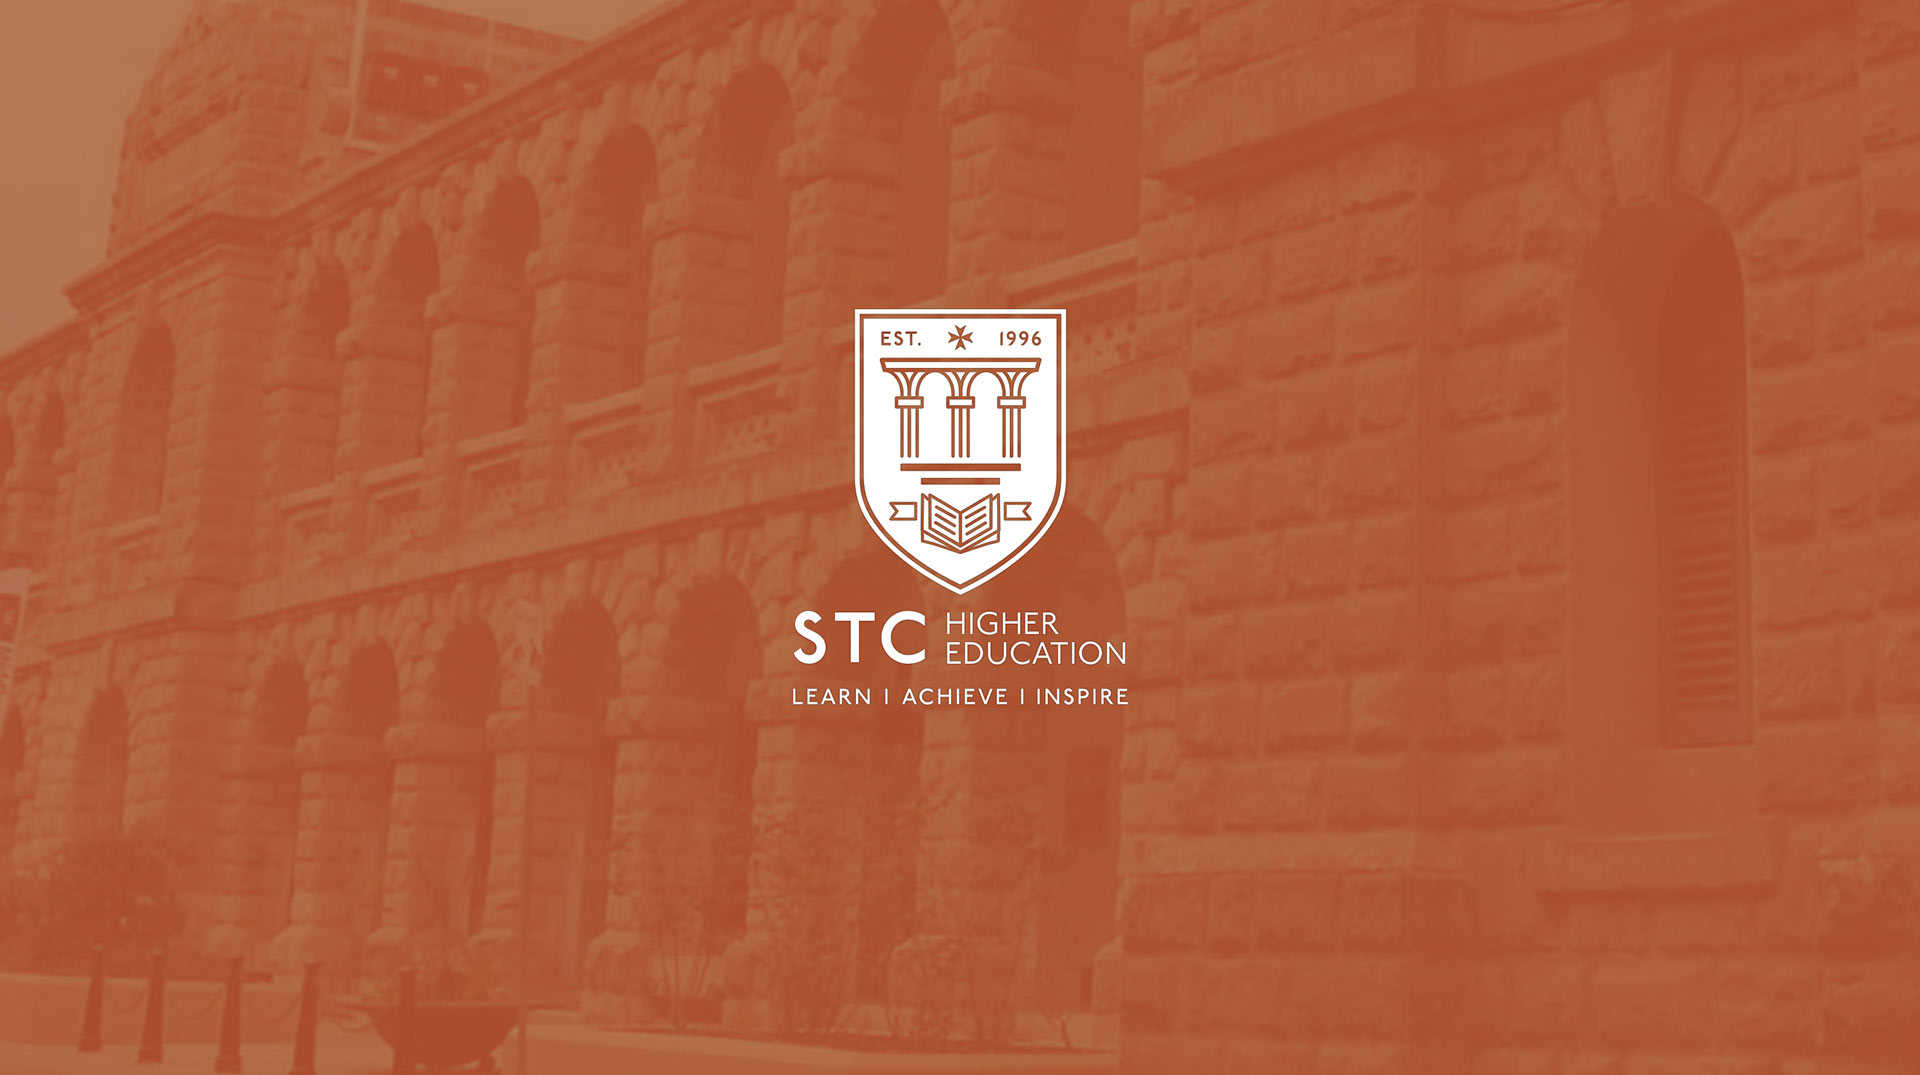 STC Higher Education